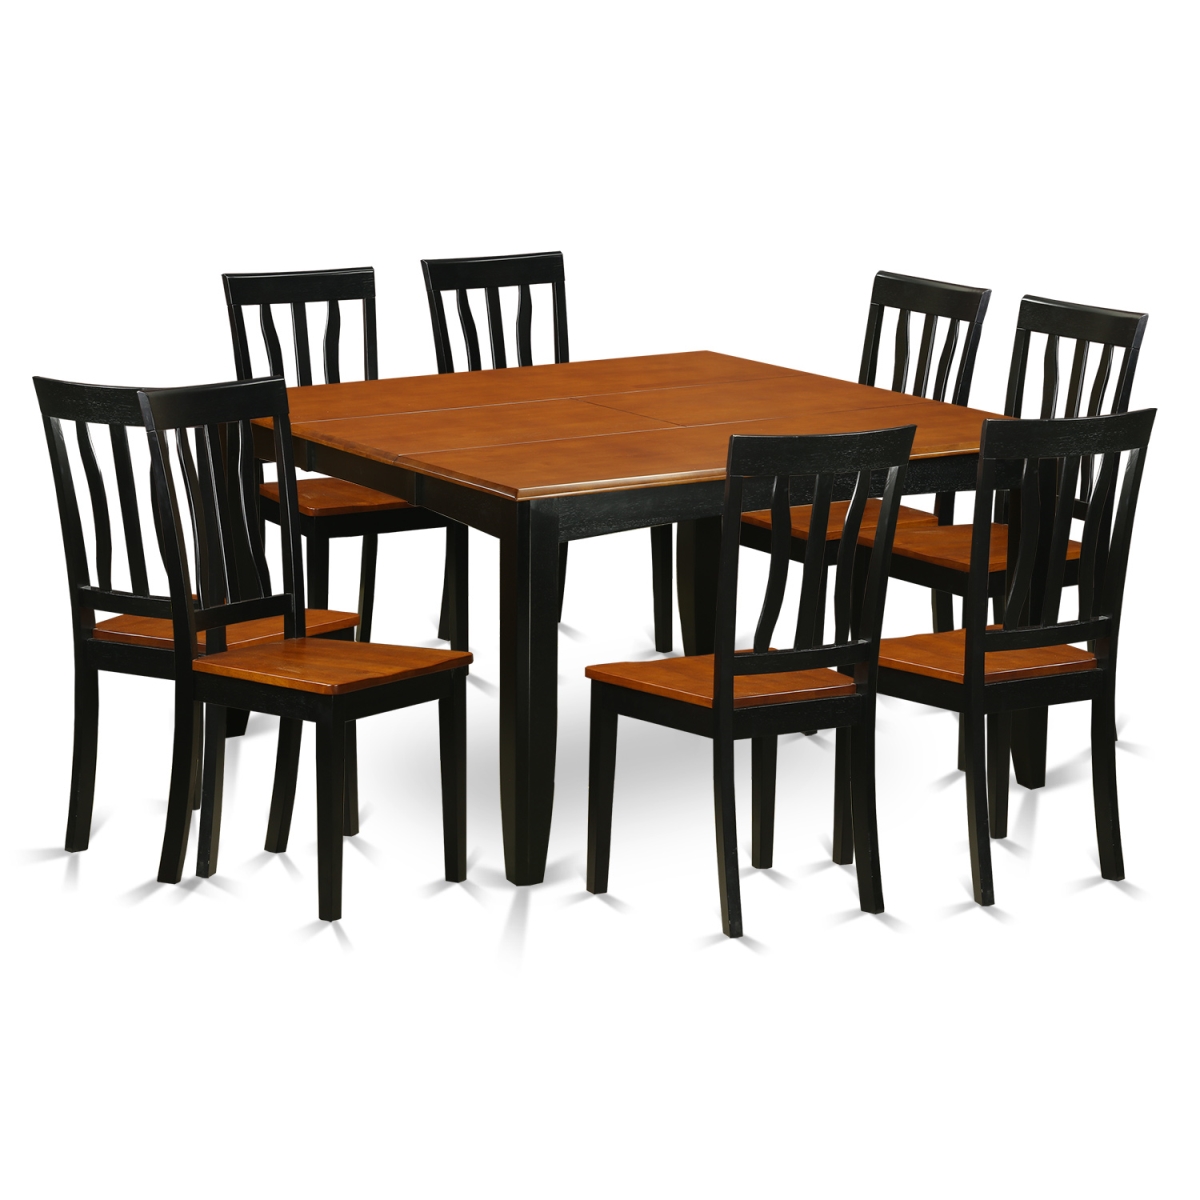 Picture of East West Furniture PFAN9-BCH-W Wood Seat Dining Room Table Set - Table & 8 Solid Wood Chairs, Black & Cherry - 9 Piece